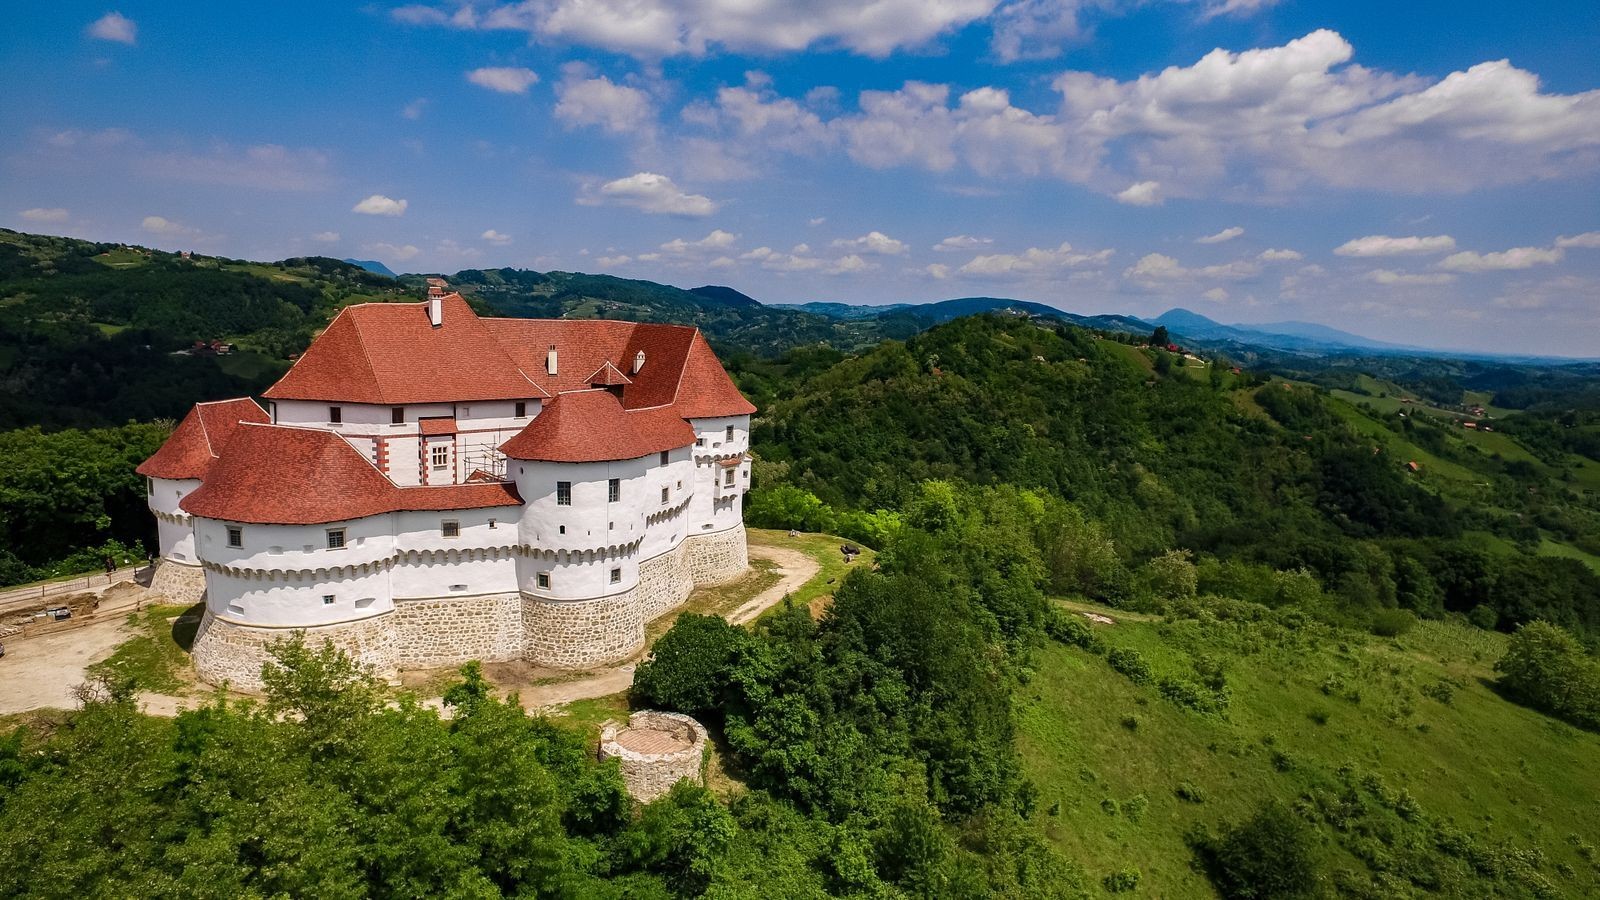 100 Castles in Northern Croatia project agreement signed